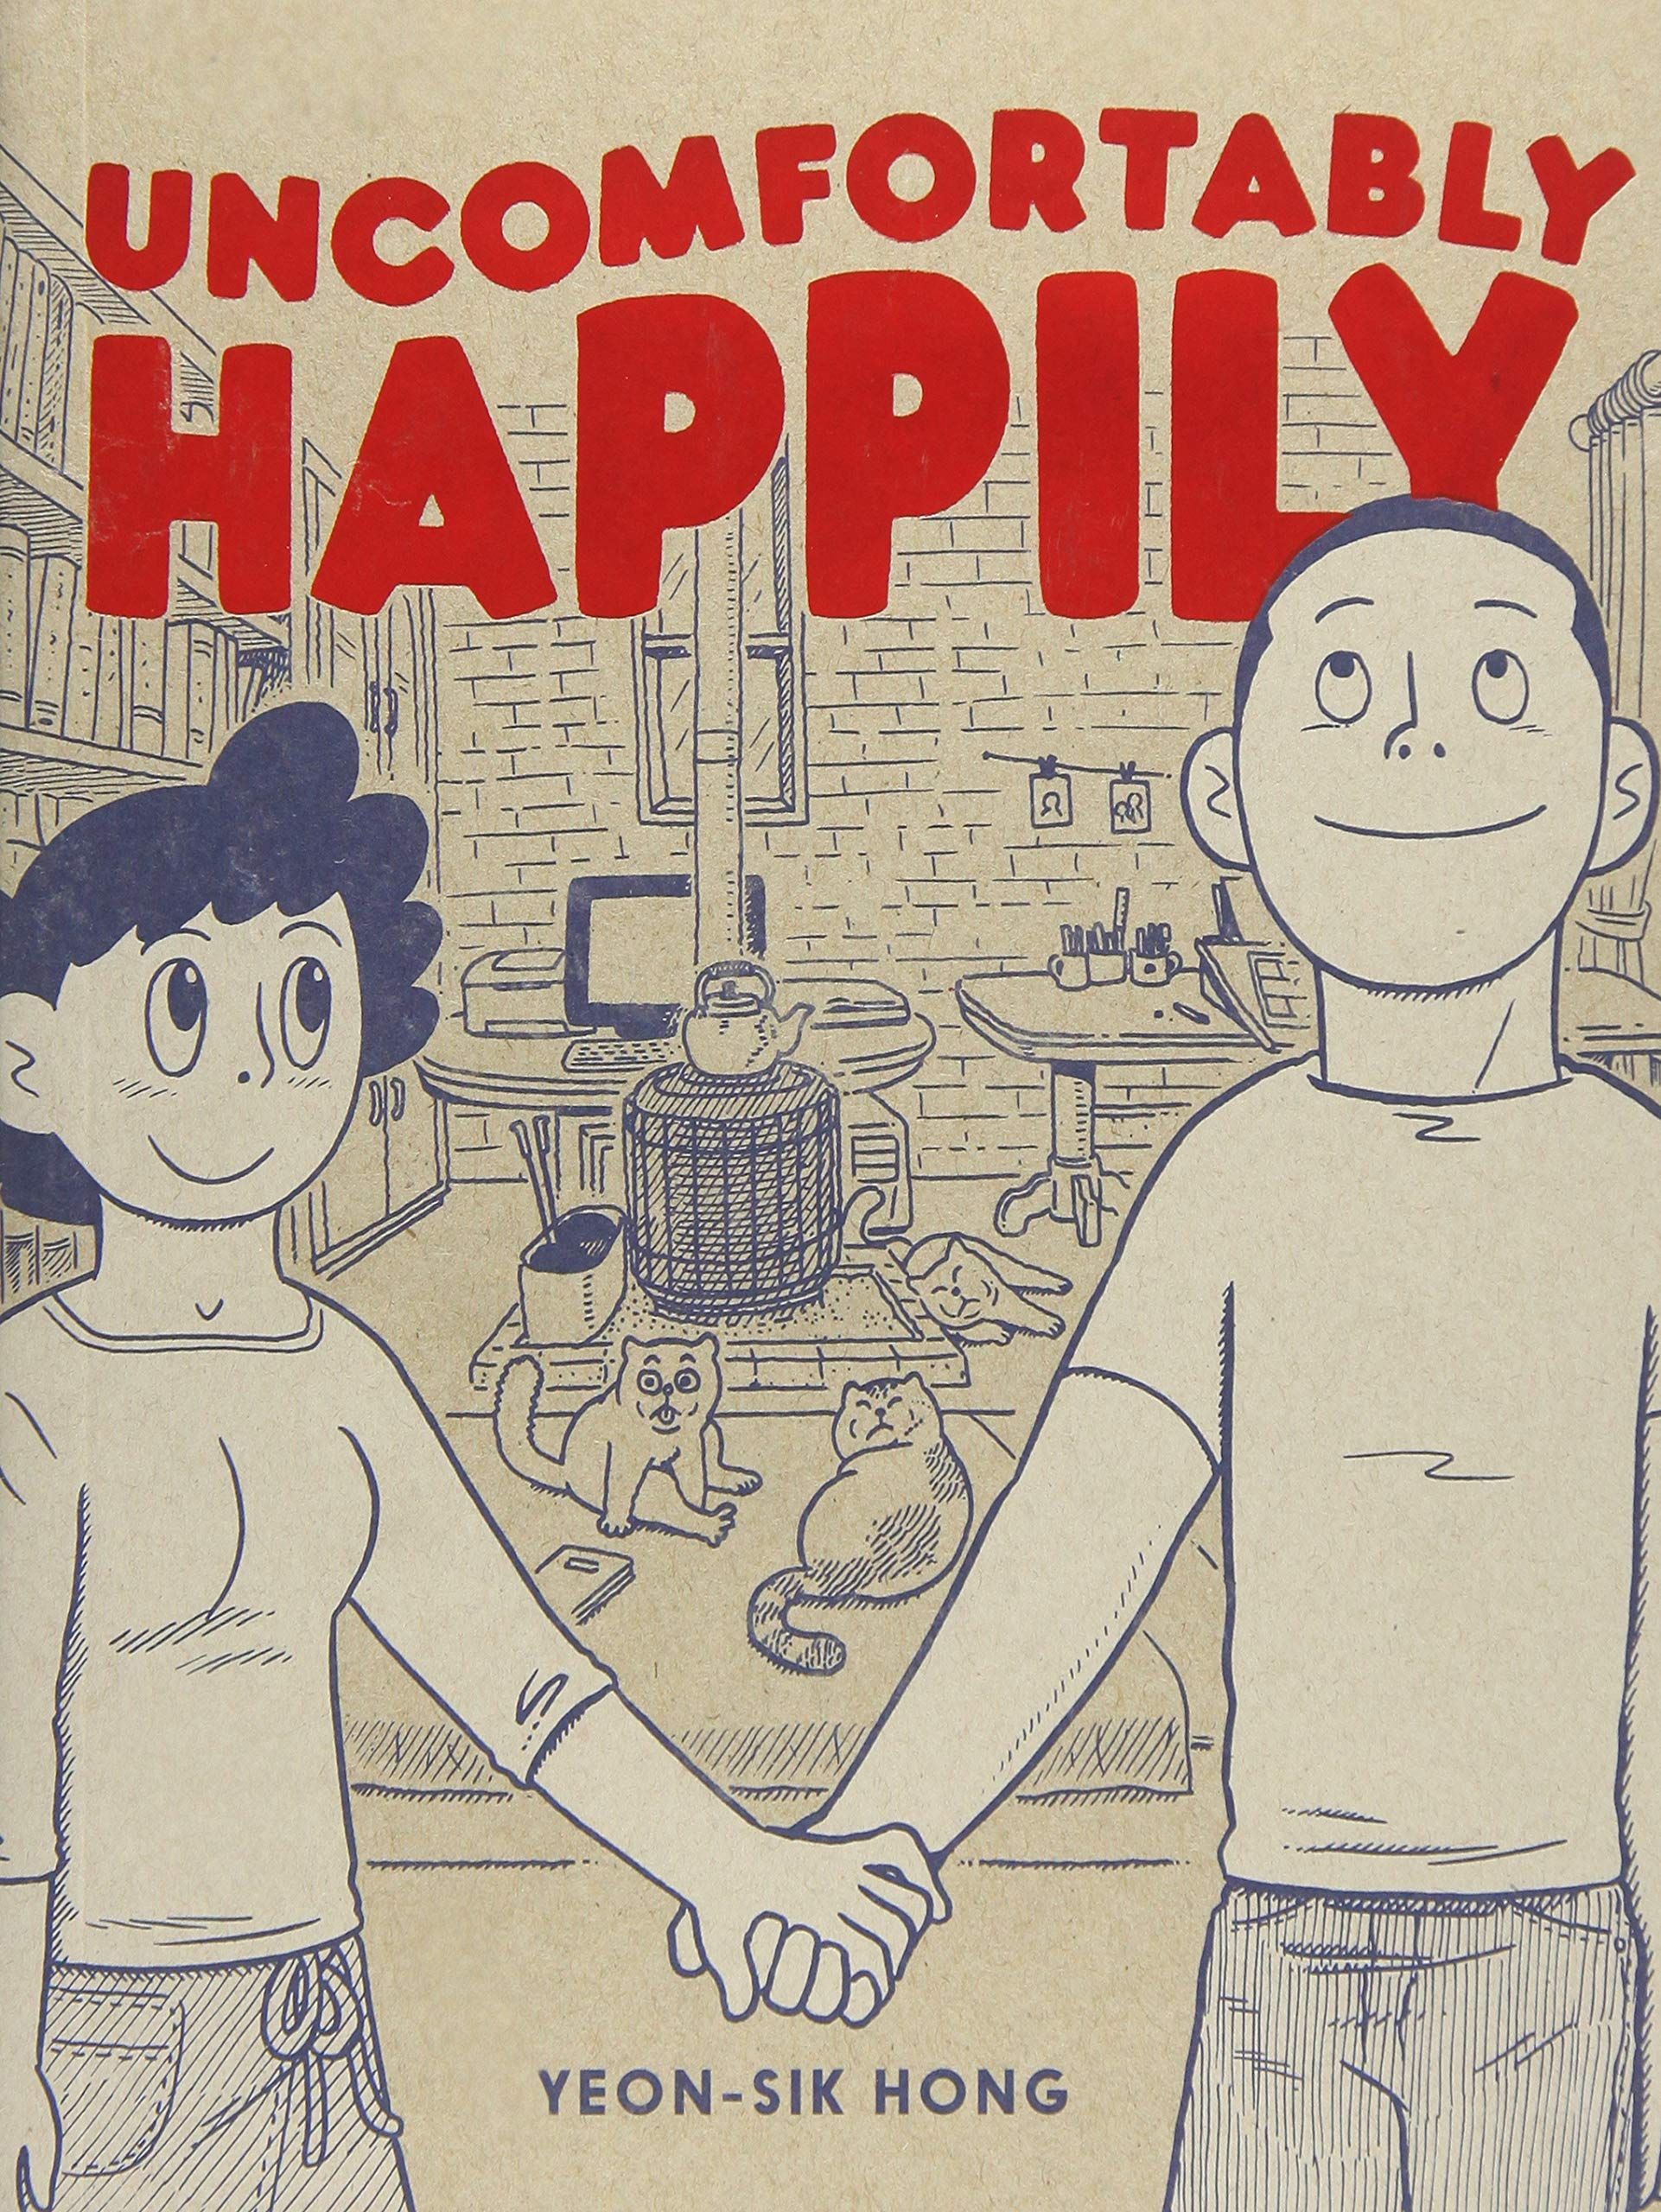 Korean Pastoral: On Yeon-sik Hong’s “Uncomfortably Happily”